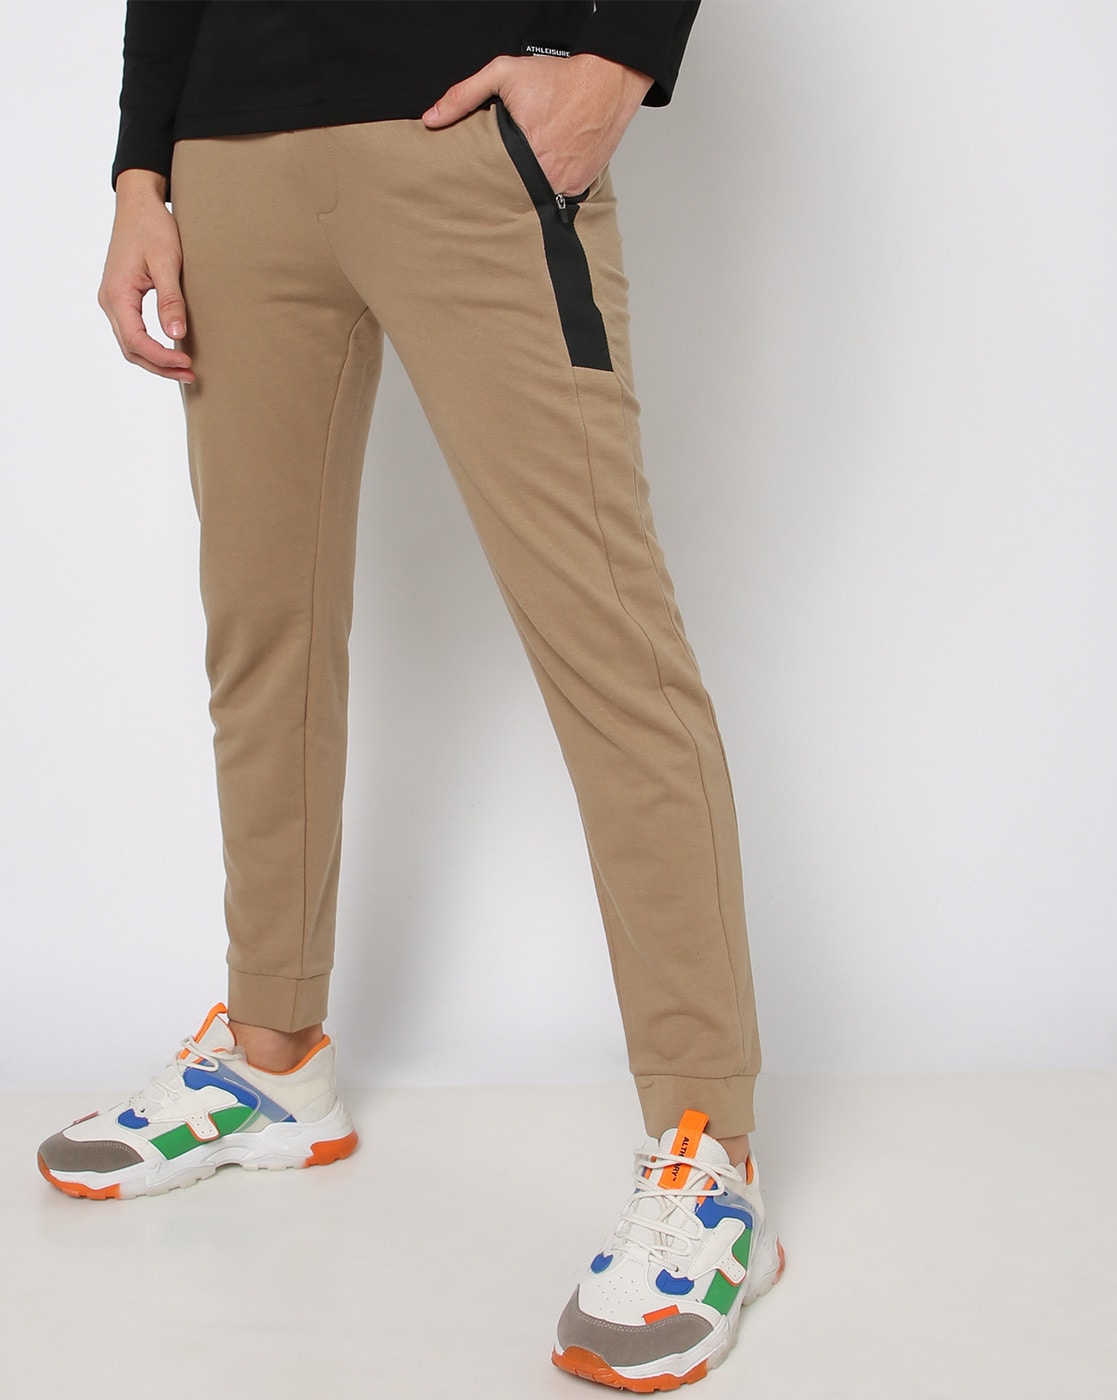 LINENEFFECT TROUSERS  Oyster White  ZARA India